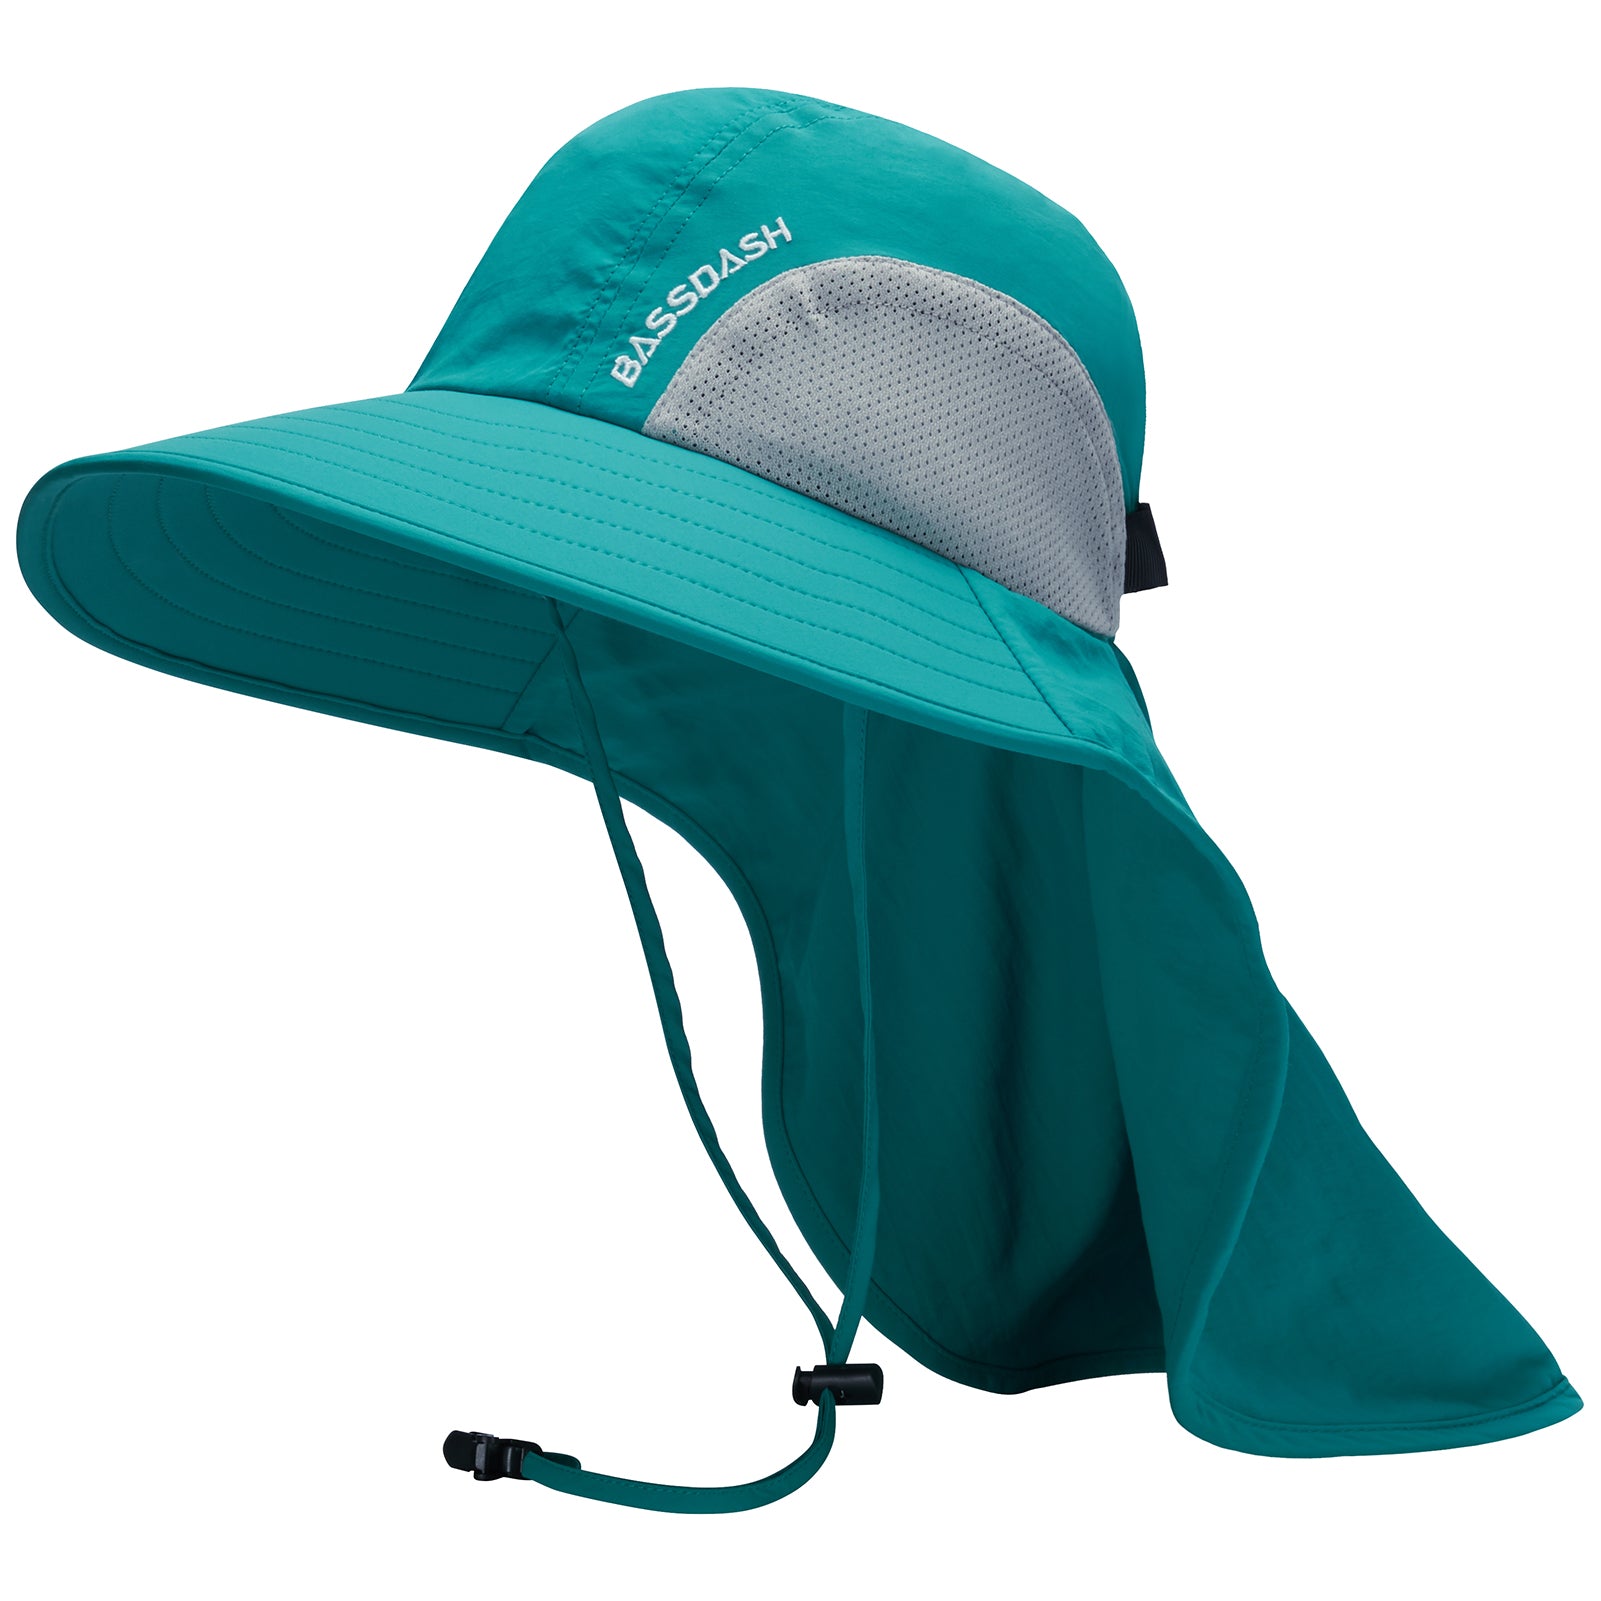 Unisex UPF 50+ Water Resistant Sun Hat with Neck Flap FH06, Lake Green